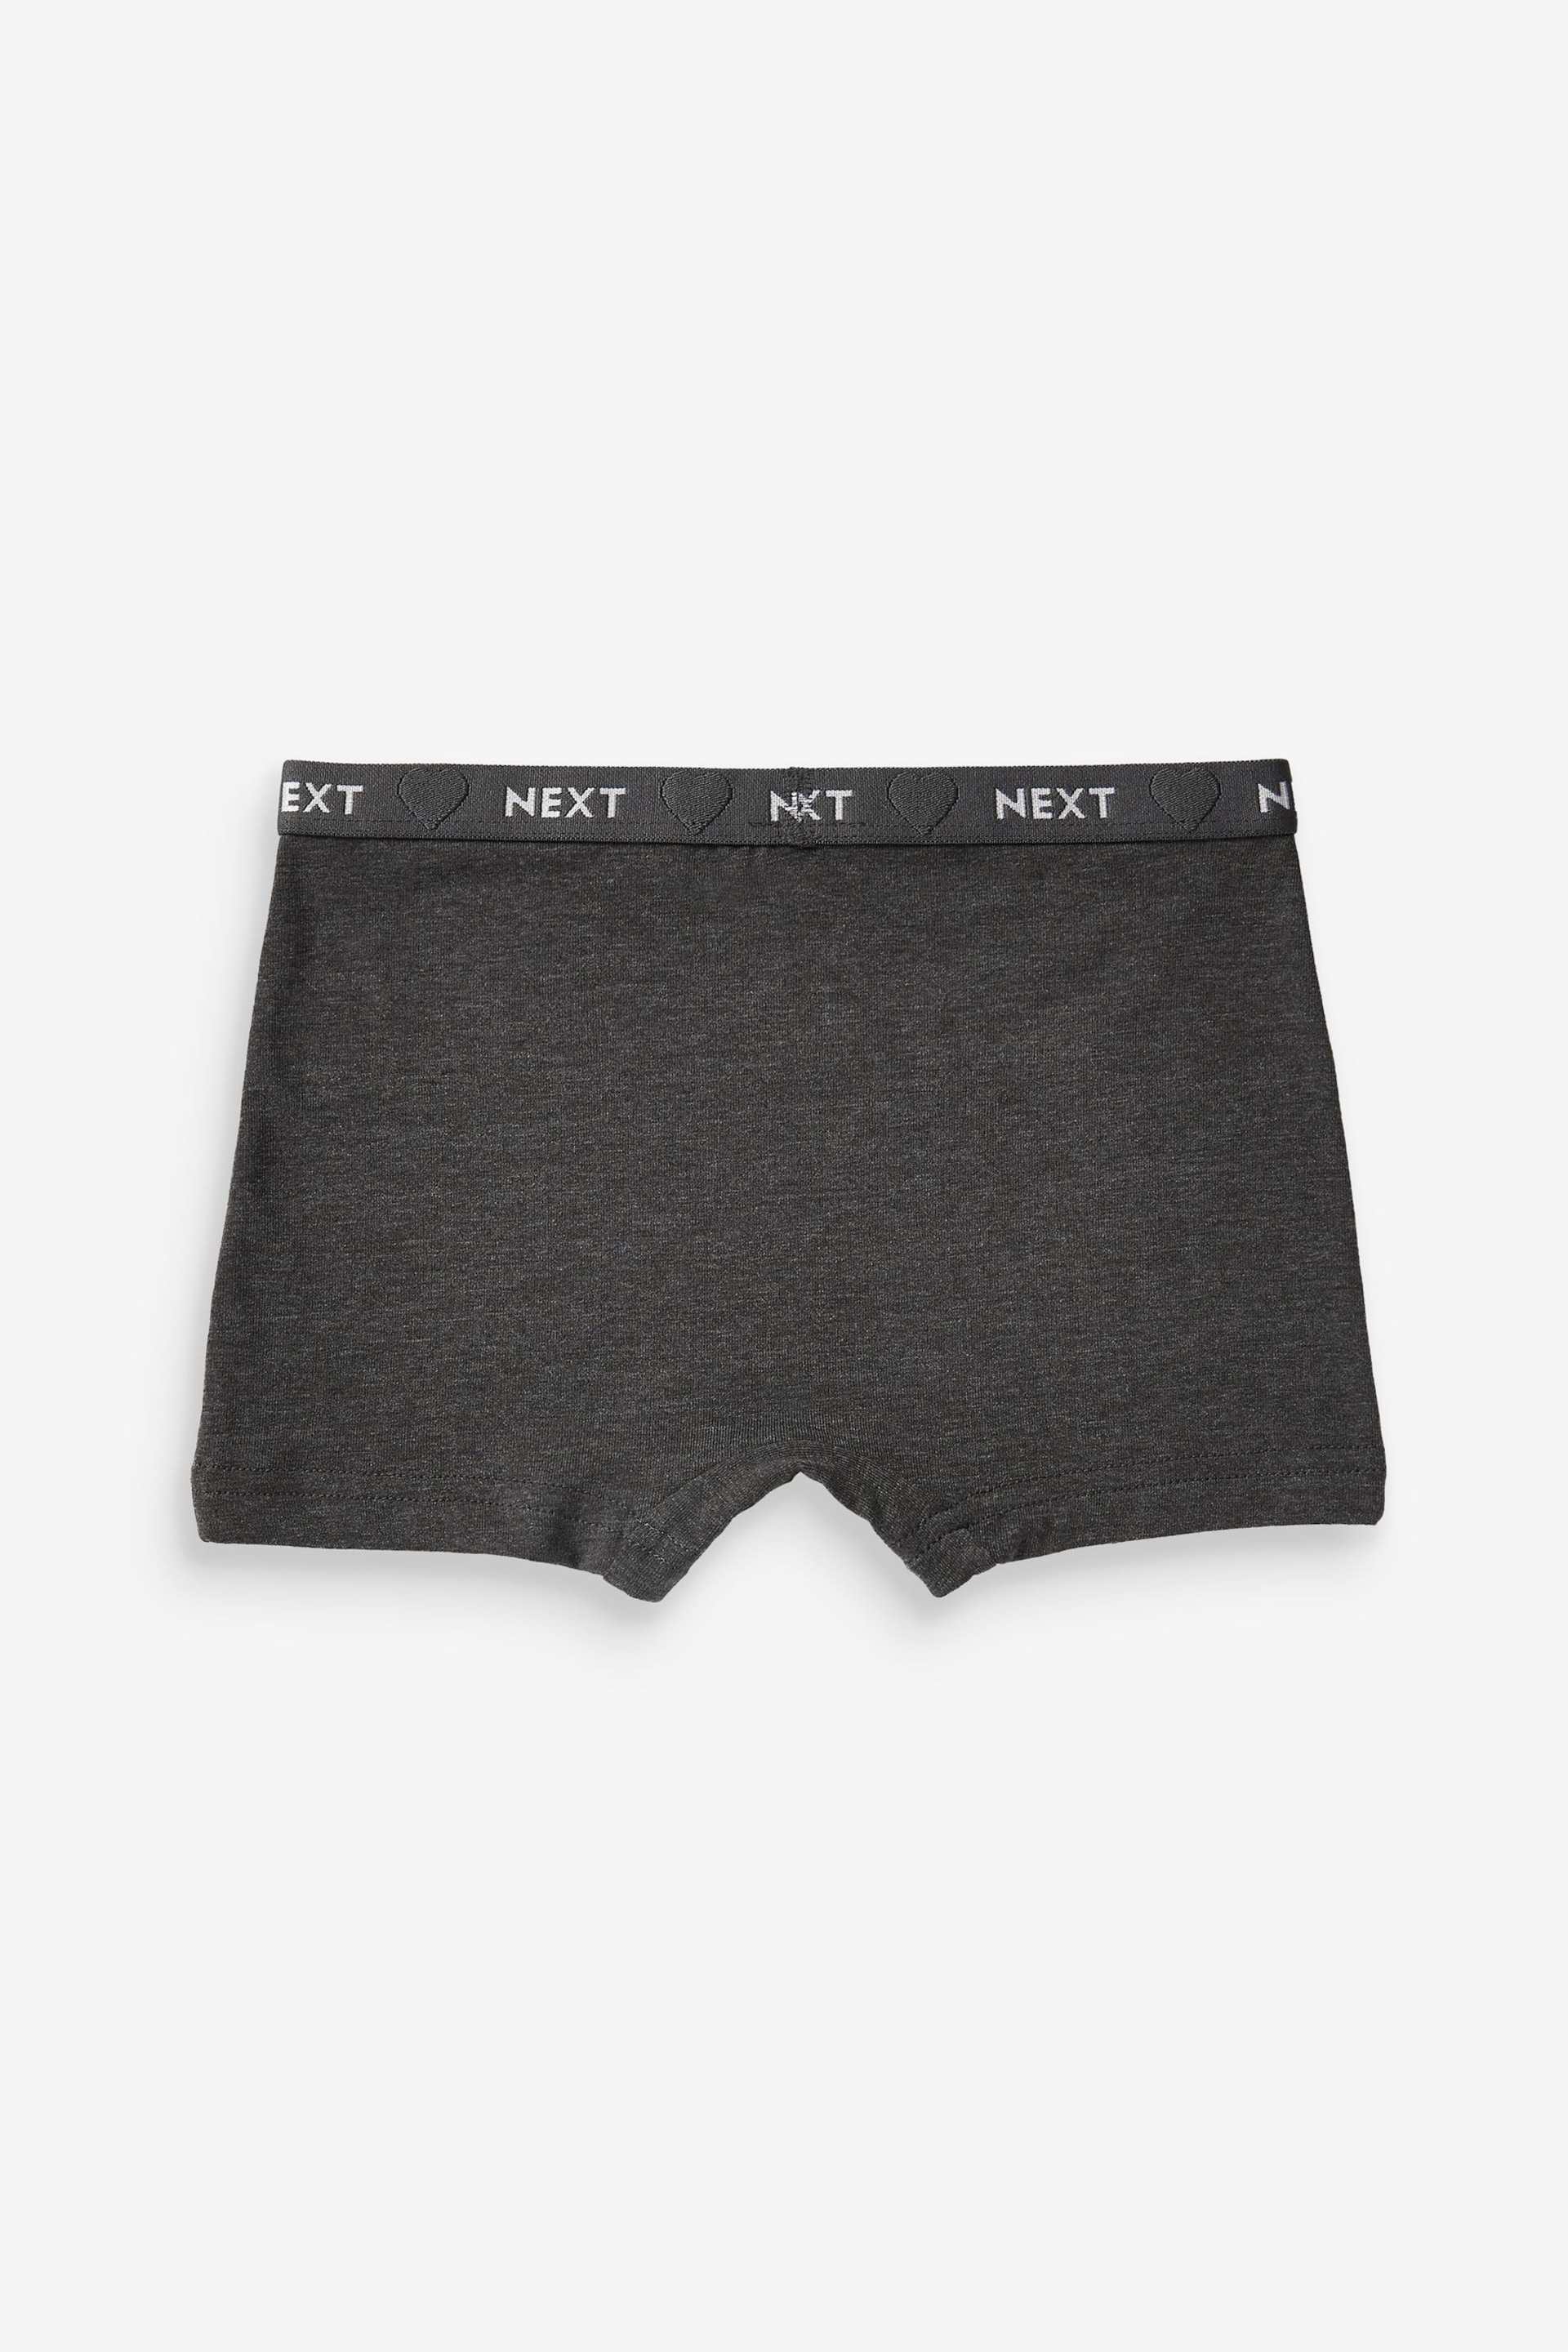 Charcoal Grey Shorts 5 Pack (2-16yrs) - Image 3 of 4